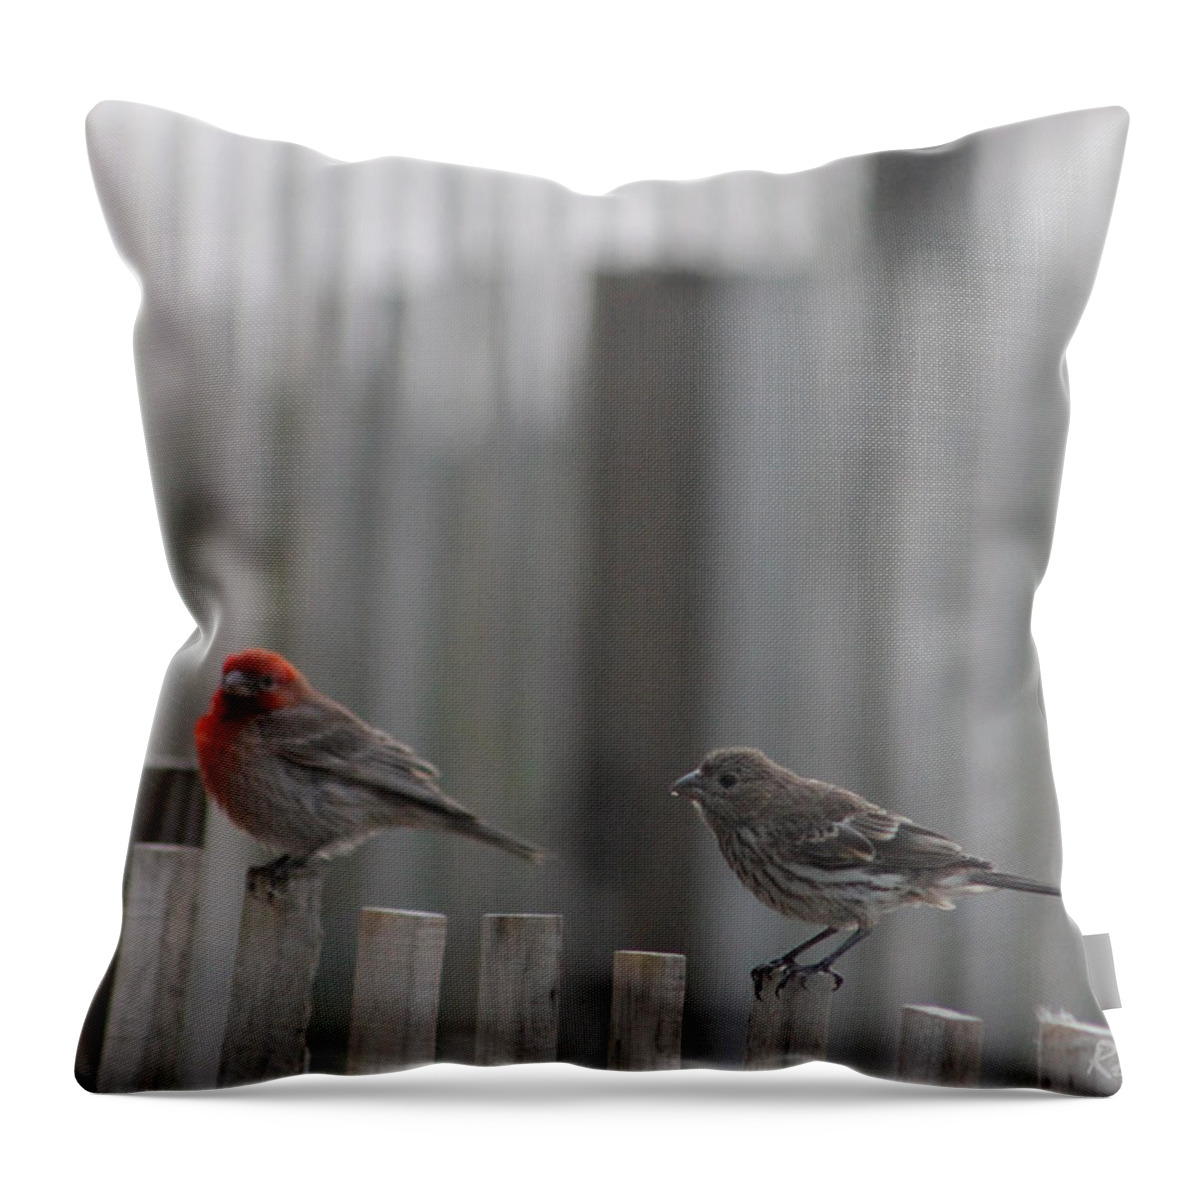 Ornithology Throw Pillow featuring the photograph House Finches On The Fence by Robert Banach